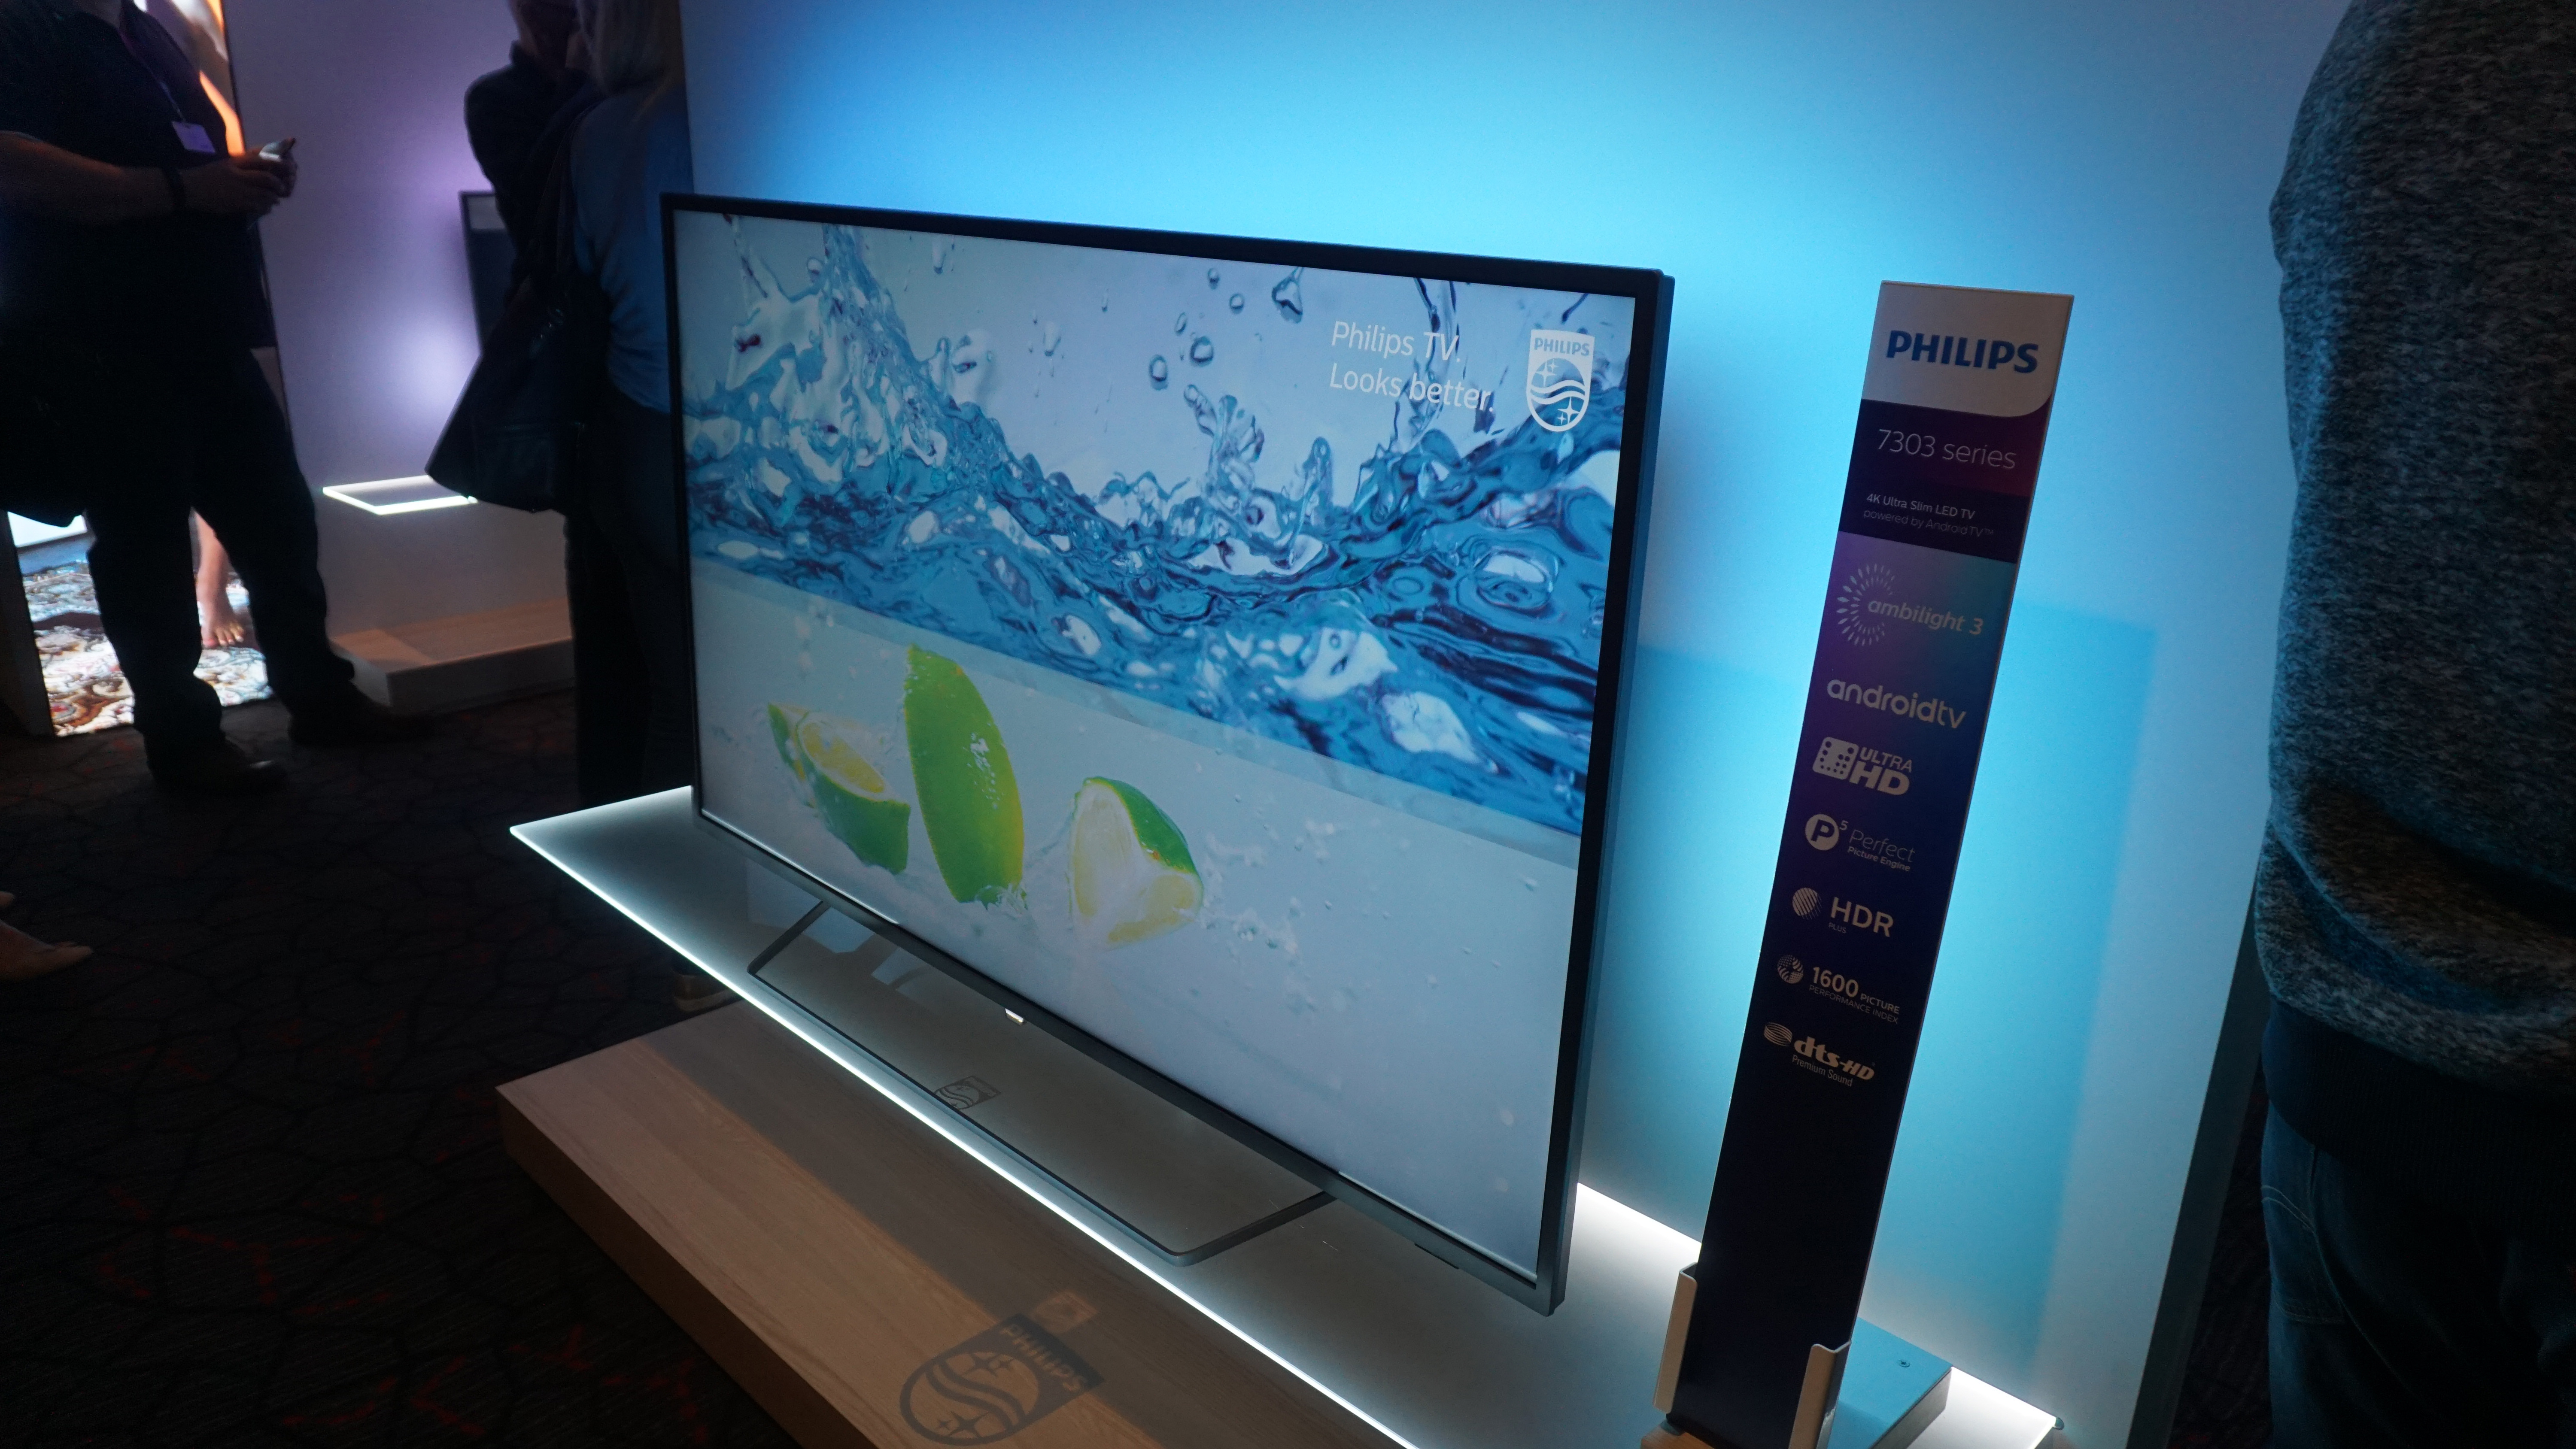 skill repertoire Diagnose Hands on: Philips 7303 Series 4K HDR TV review | TechRadar